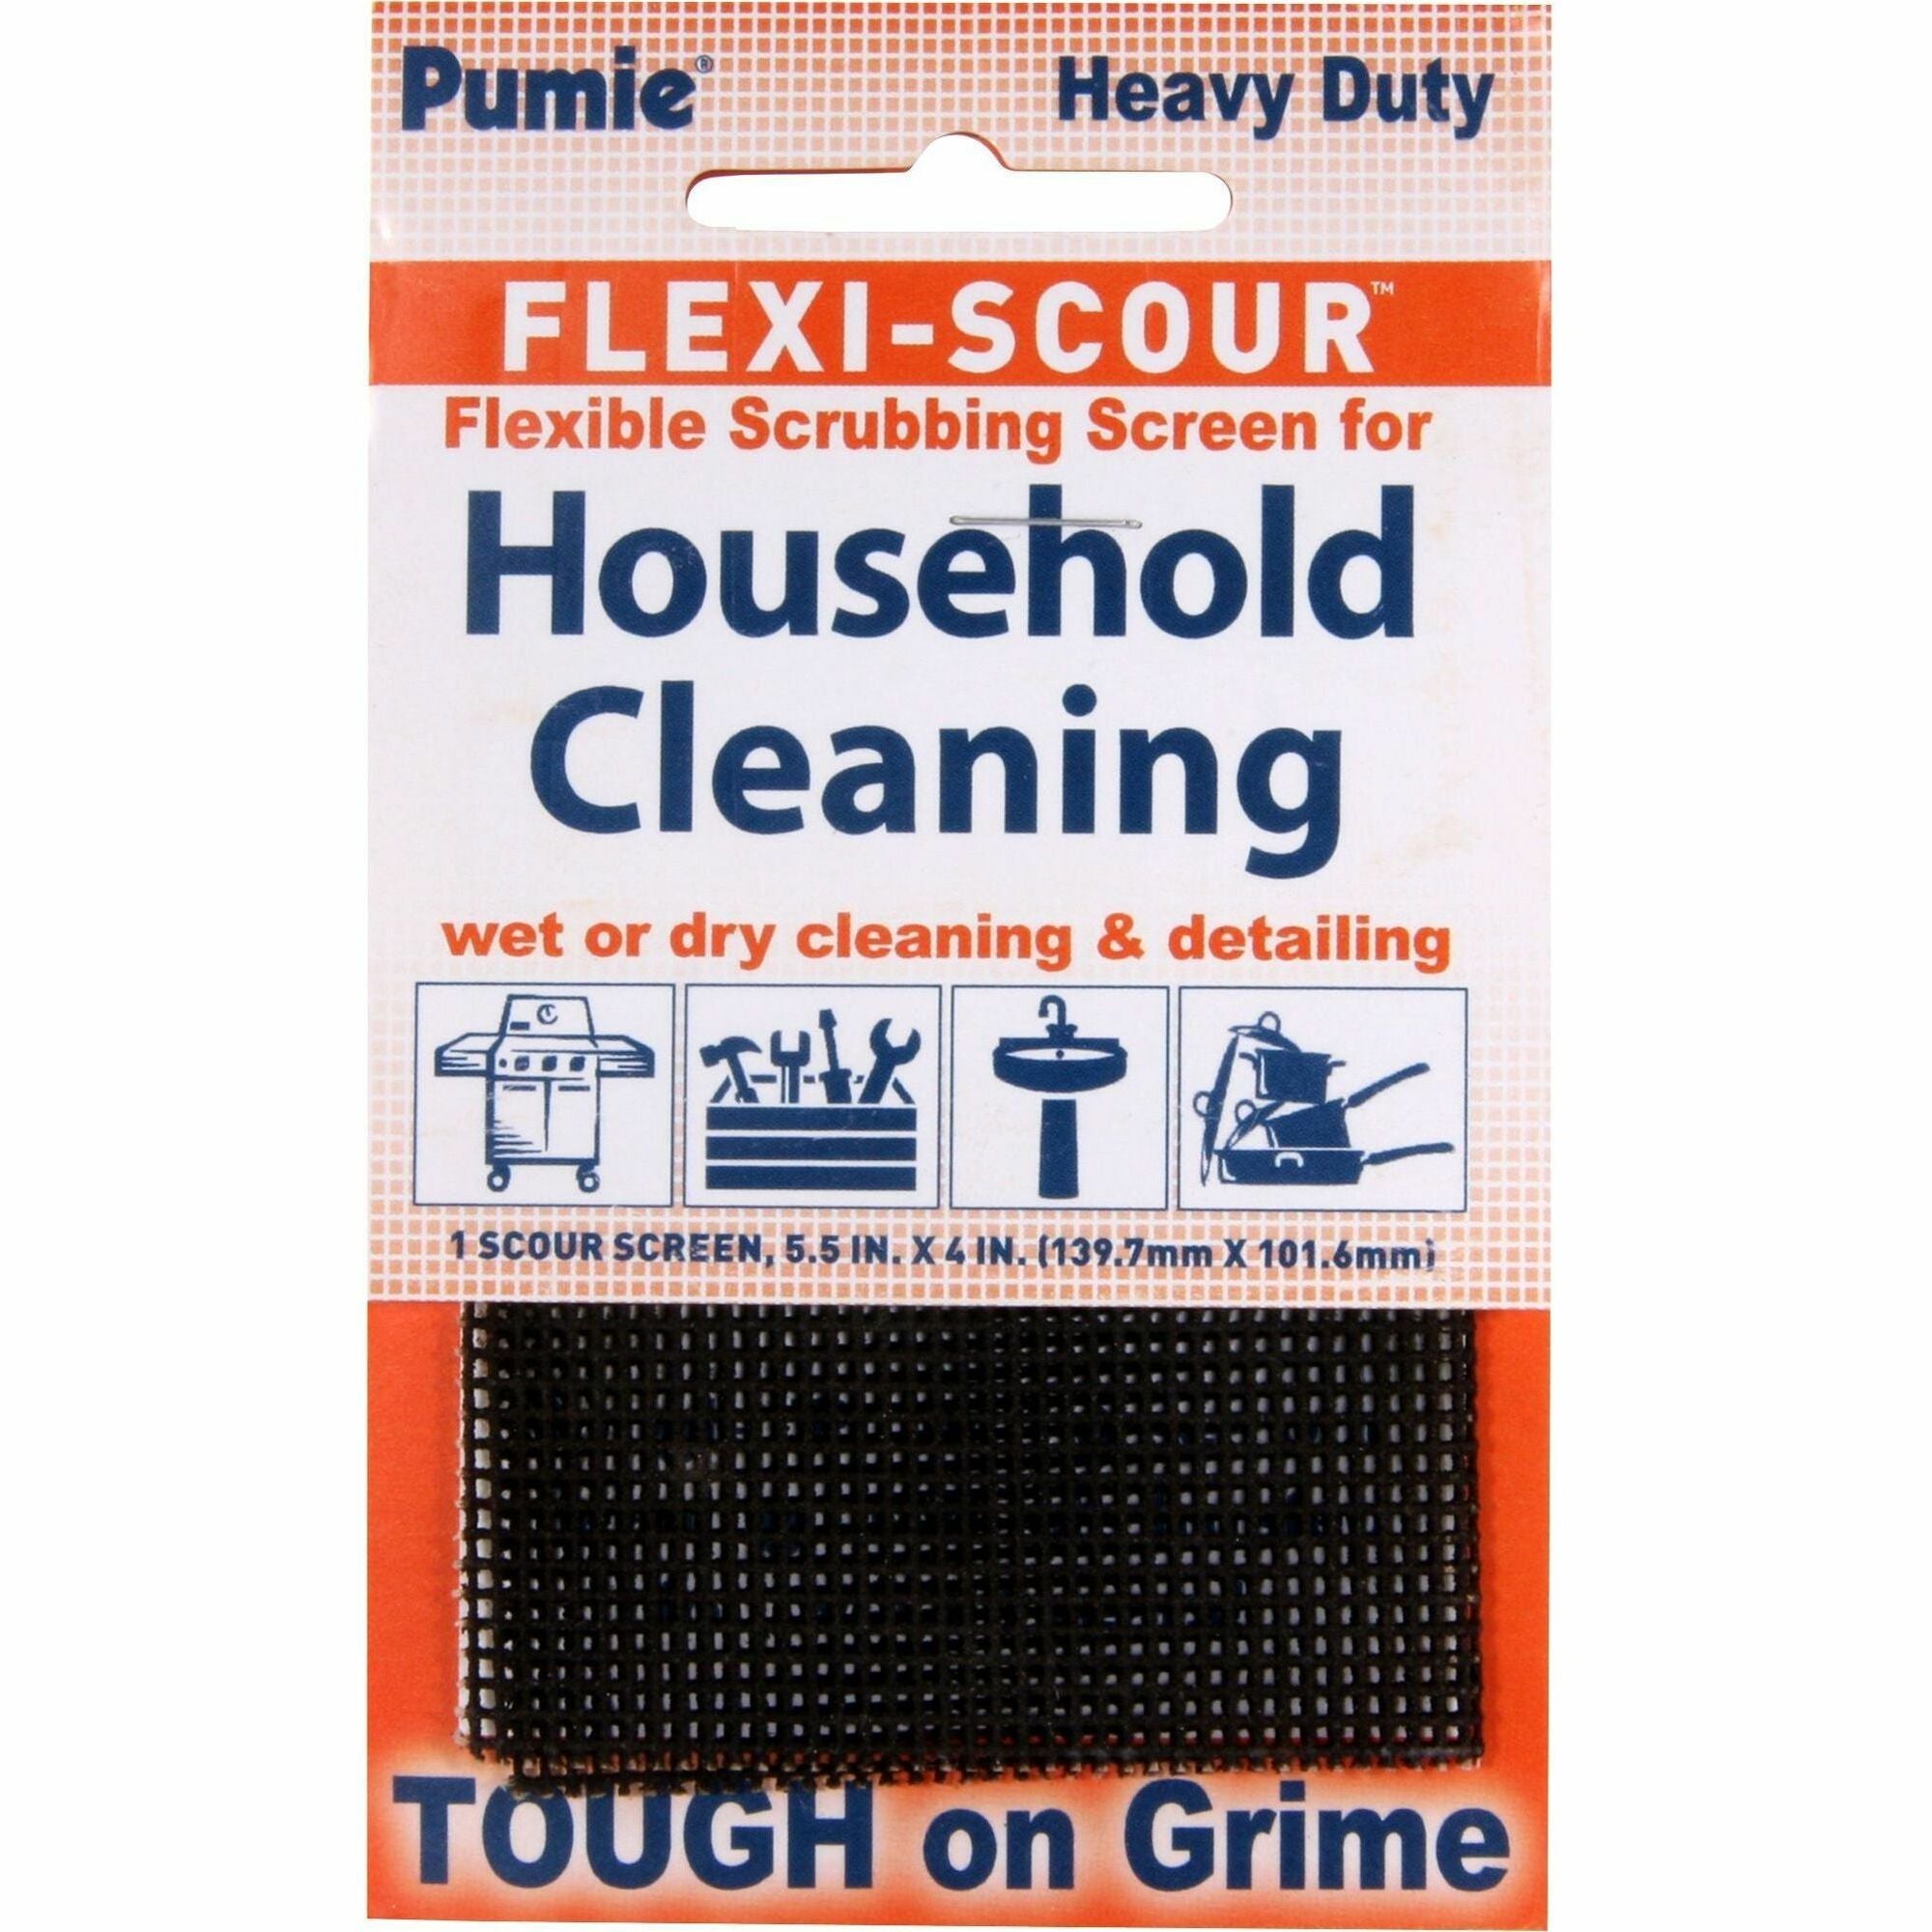 us-pumice-flexi-scour-scouring-screen-ready-to-use-1-pack-easy-to-use-chemical-free-flexible-gray_upmflex48 - 1